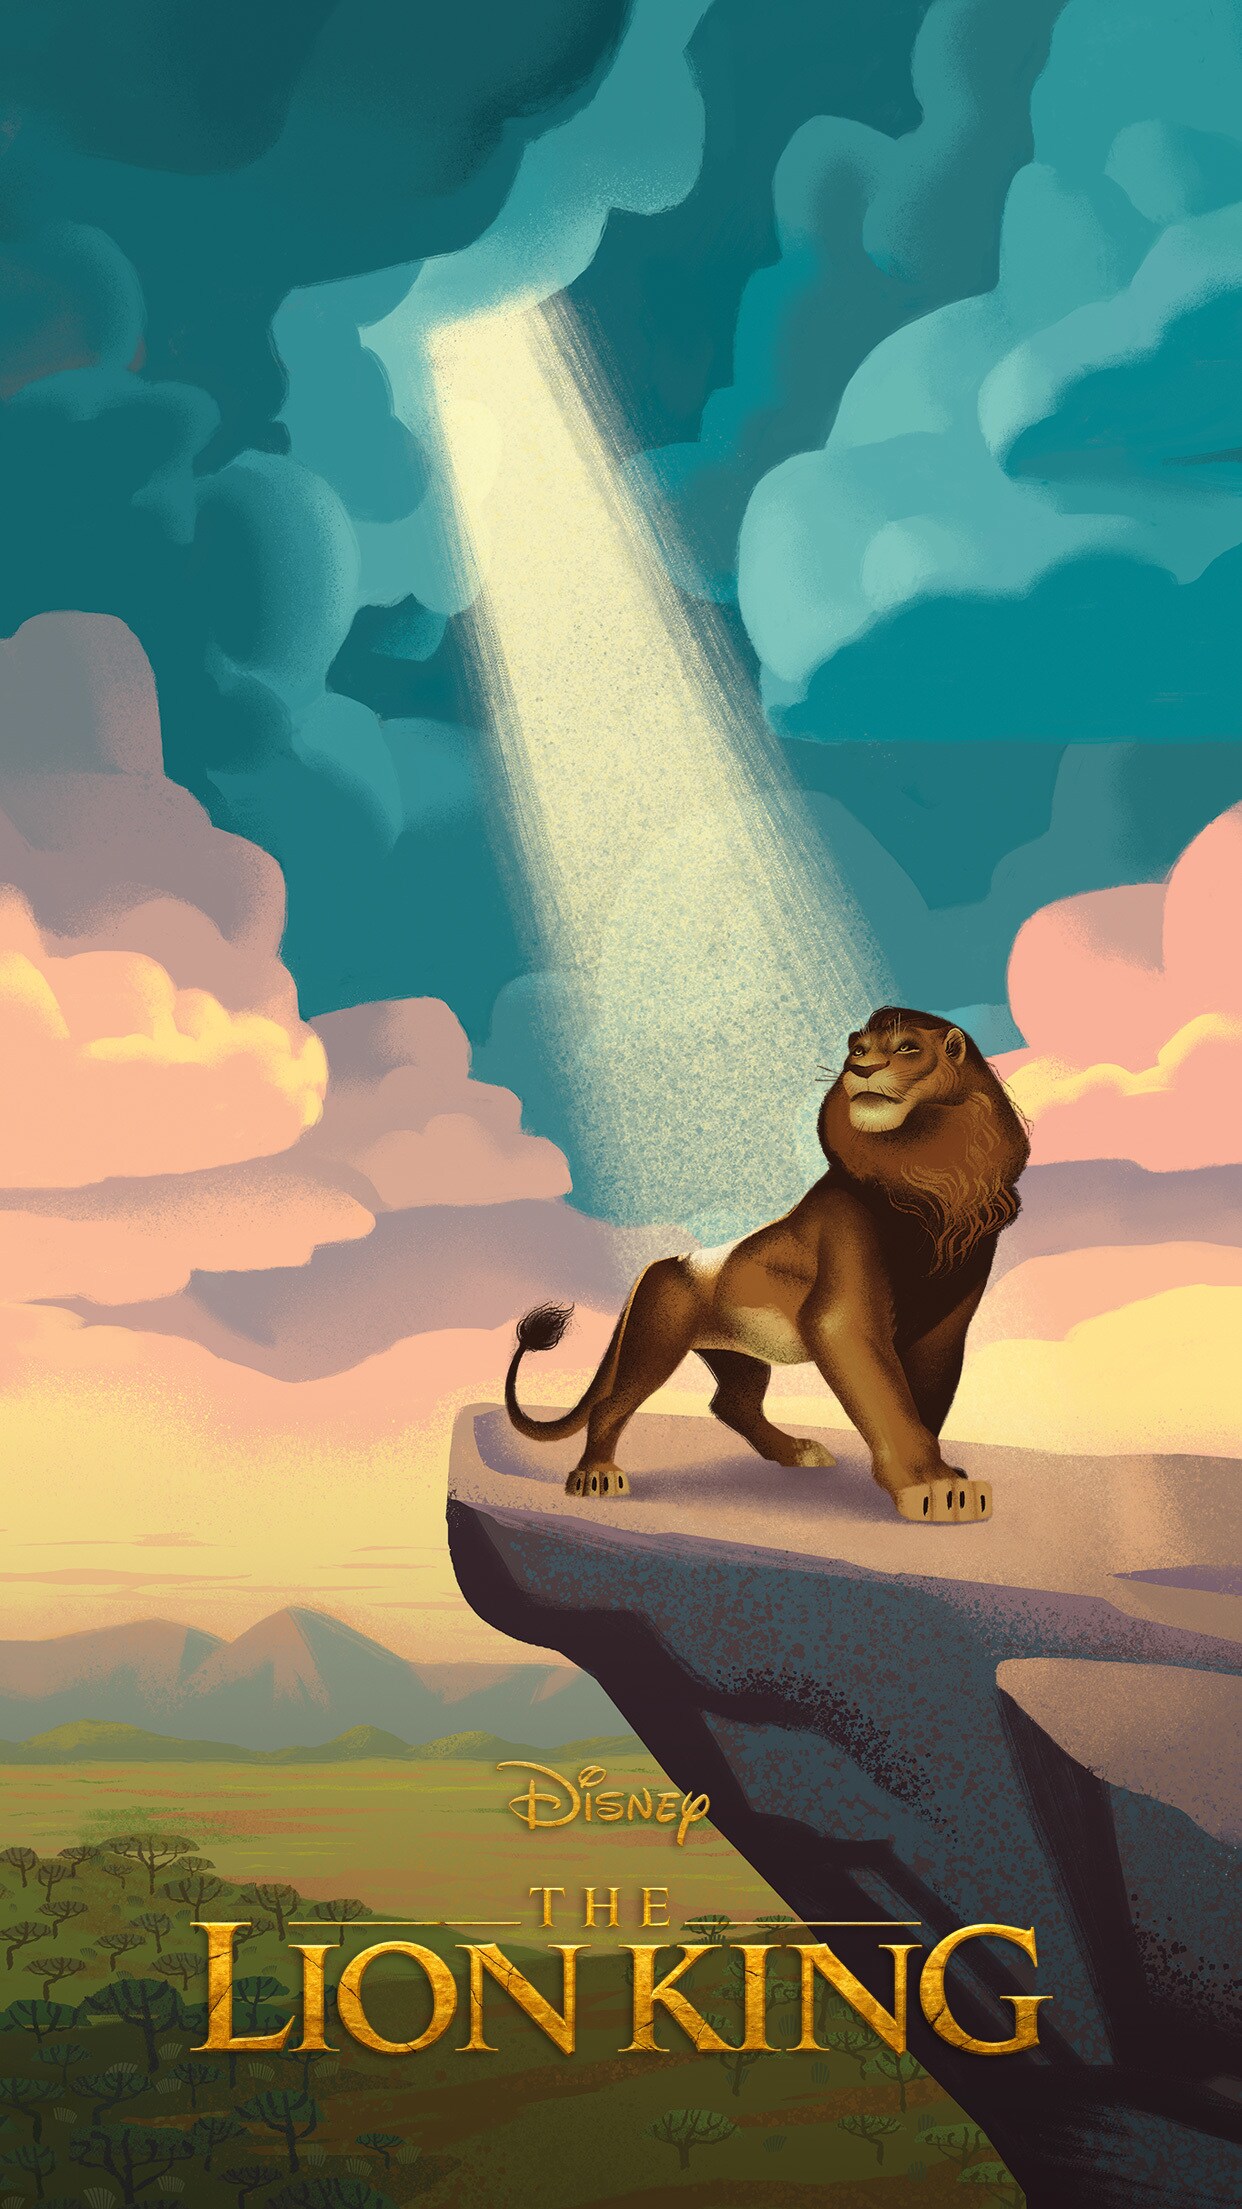 The Lion King Mobile Wallpapers | Disney Philippines